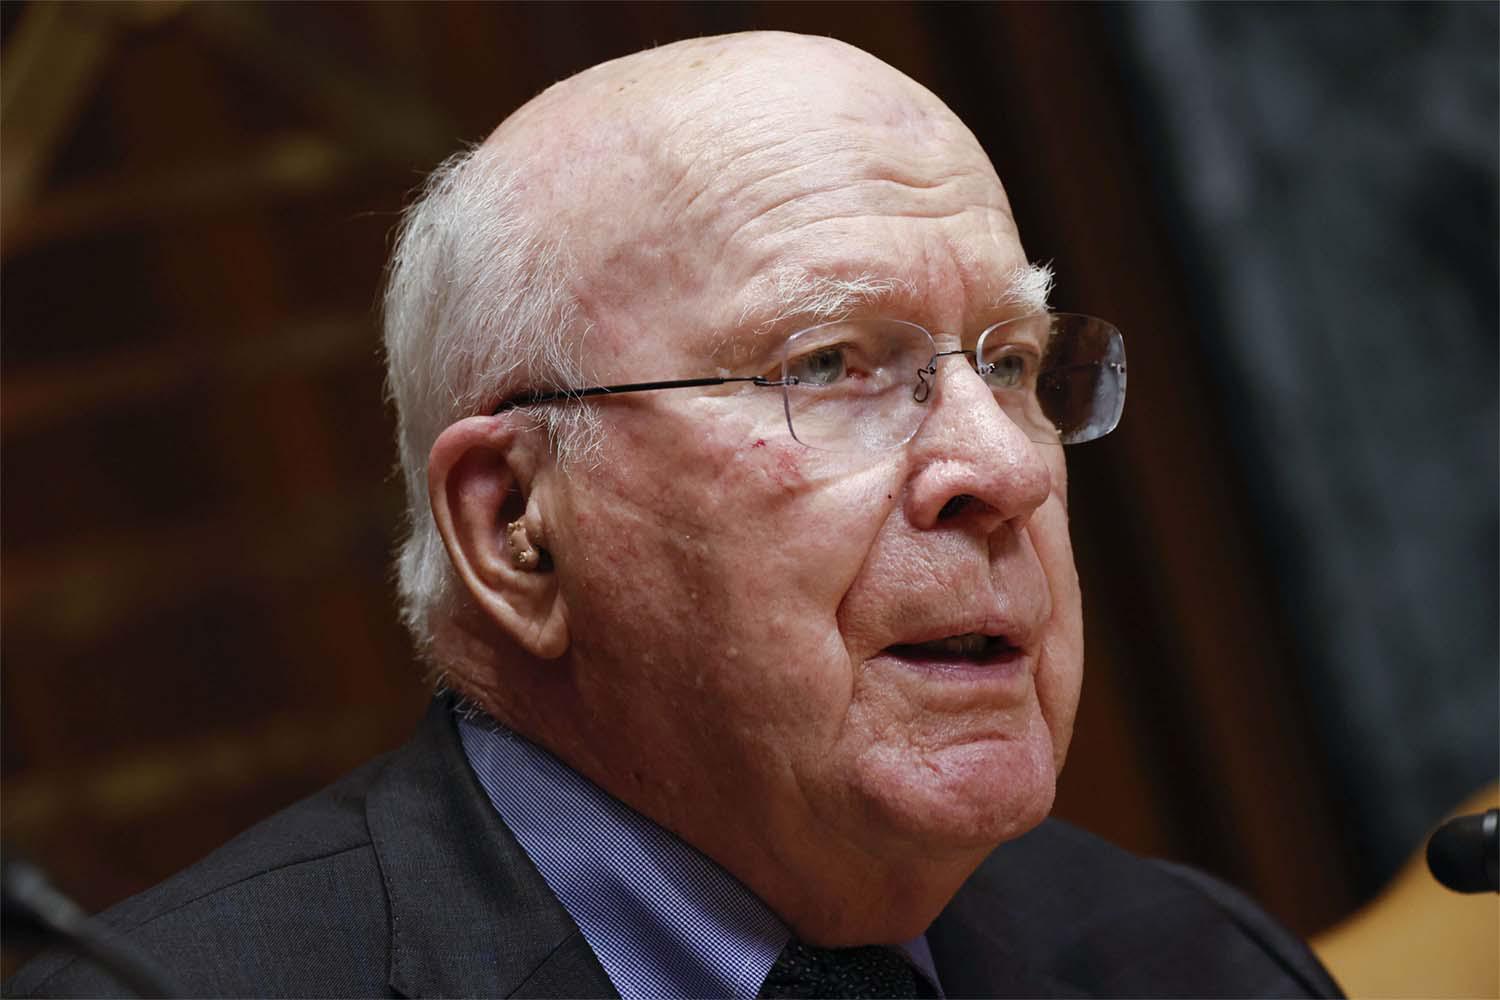 Leahy rejected an assessment offered by the US State Department to justify the aid